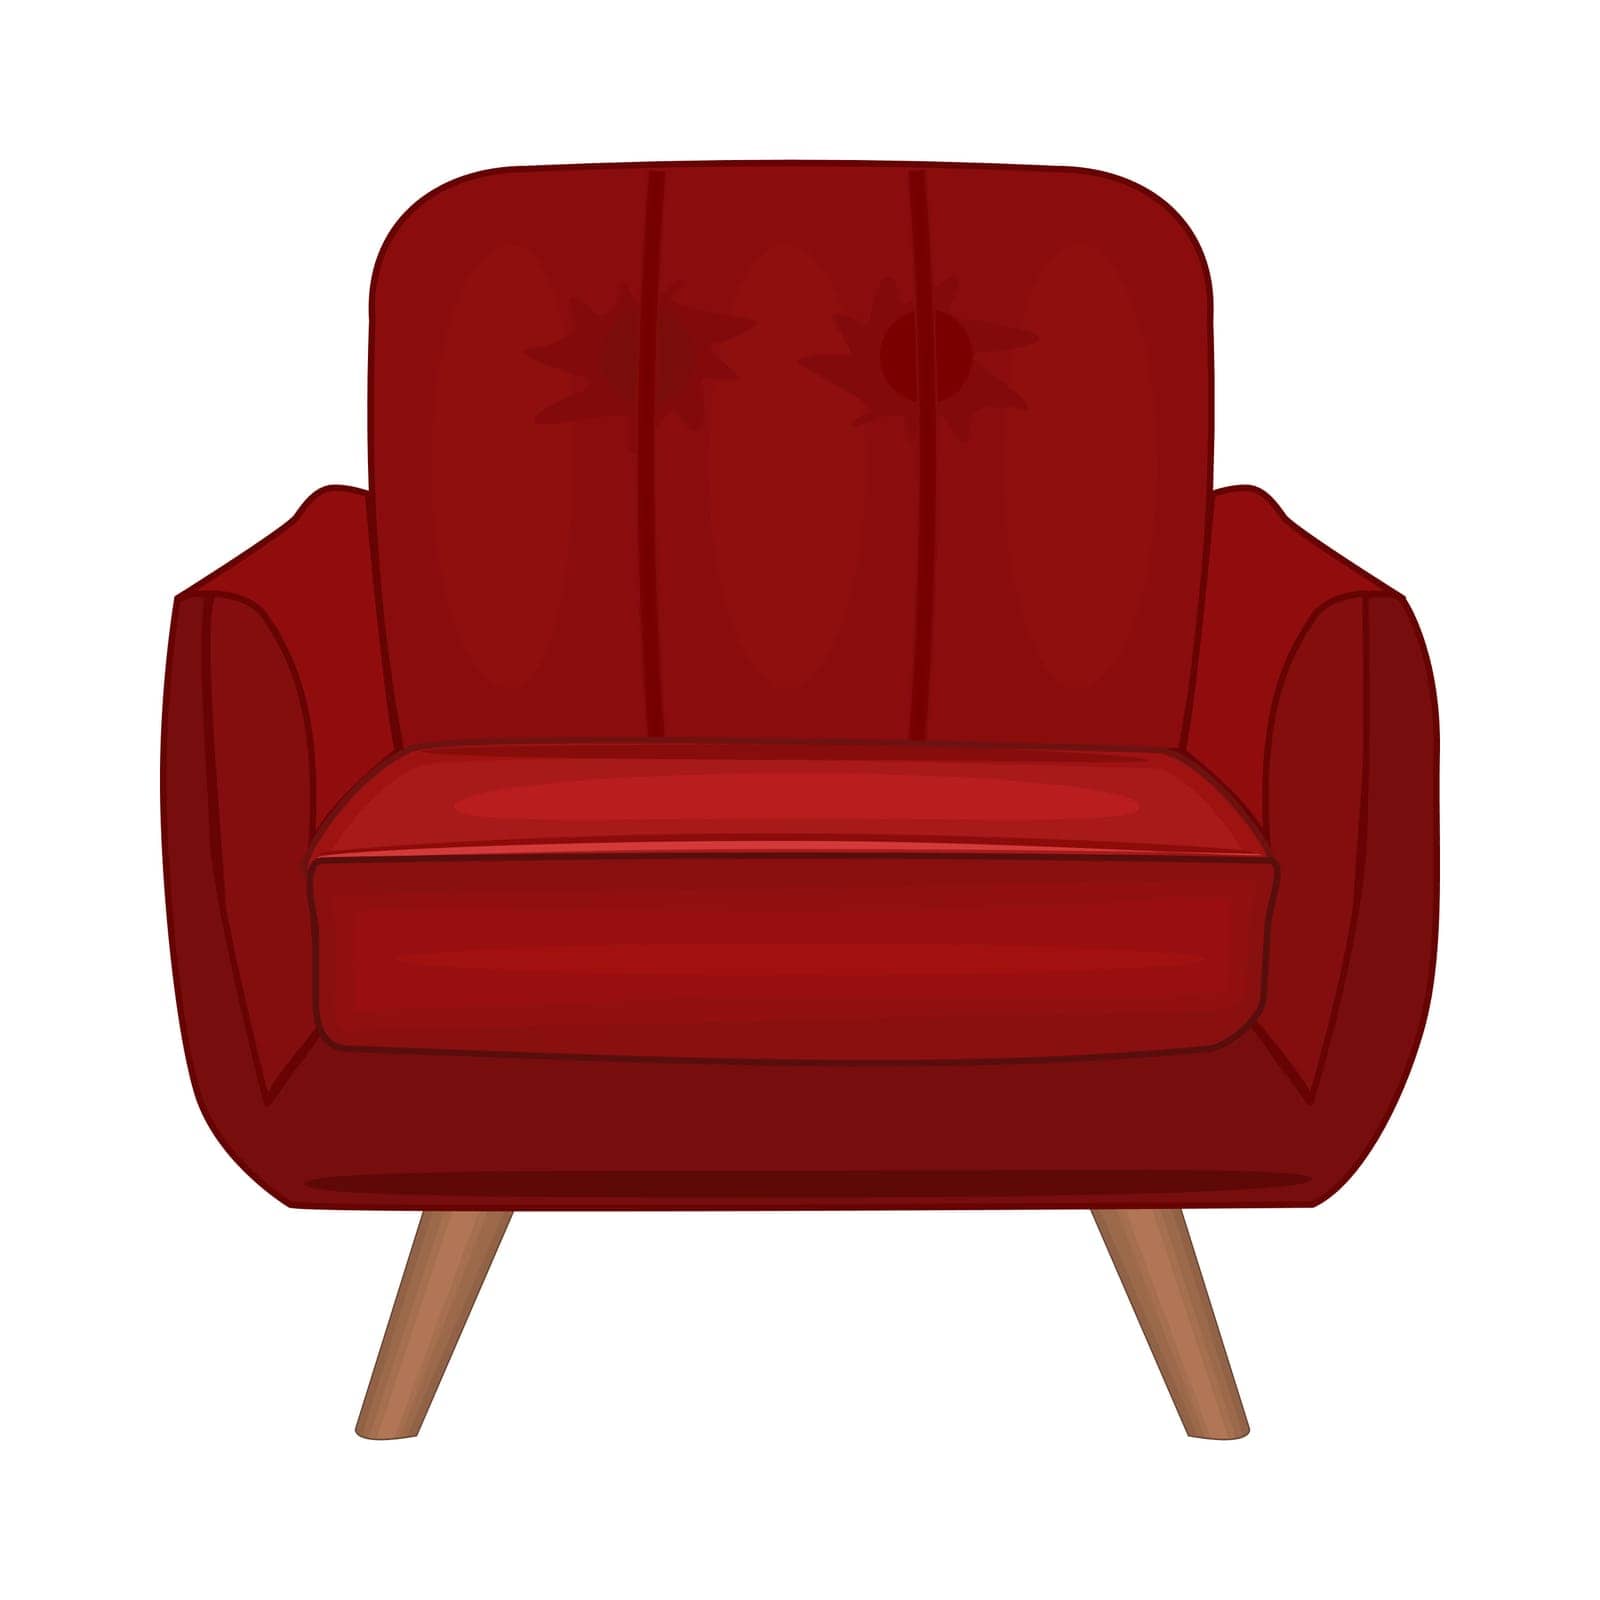 Red armchair isolated on  white background. Soft armchair with upholstery. by KajaNi